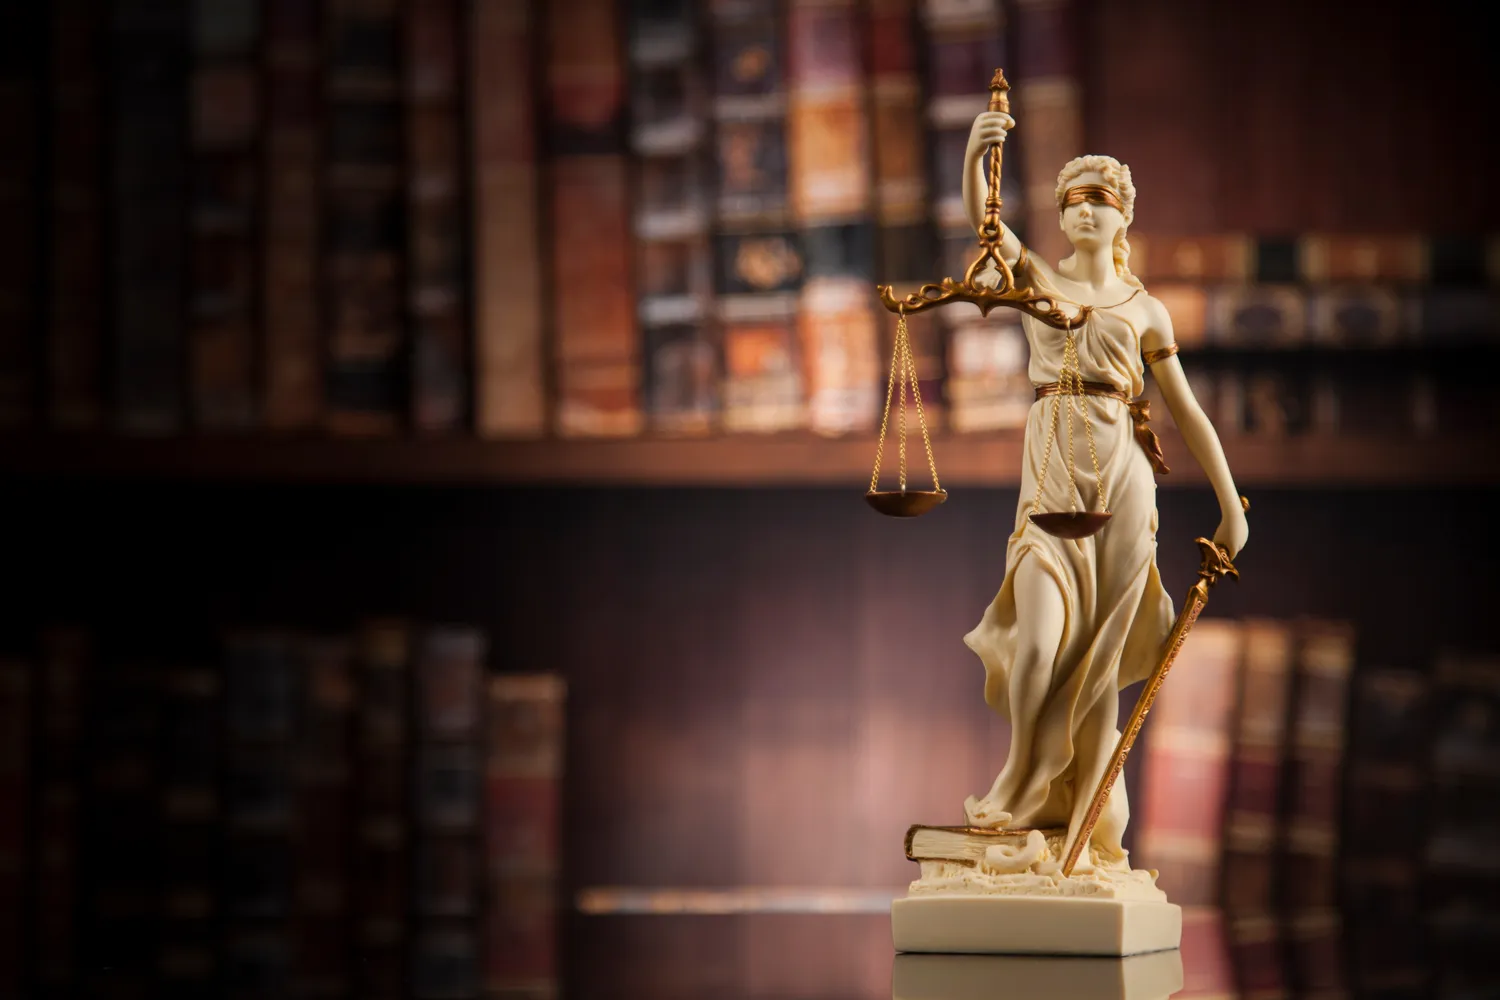 Image of Lady Justice in front of a bookshelf of law books